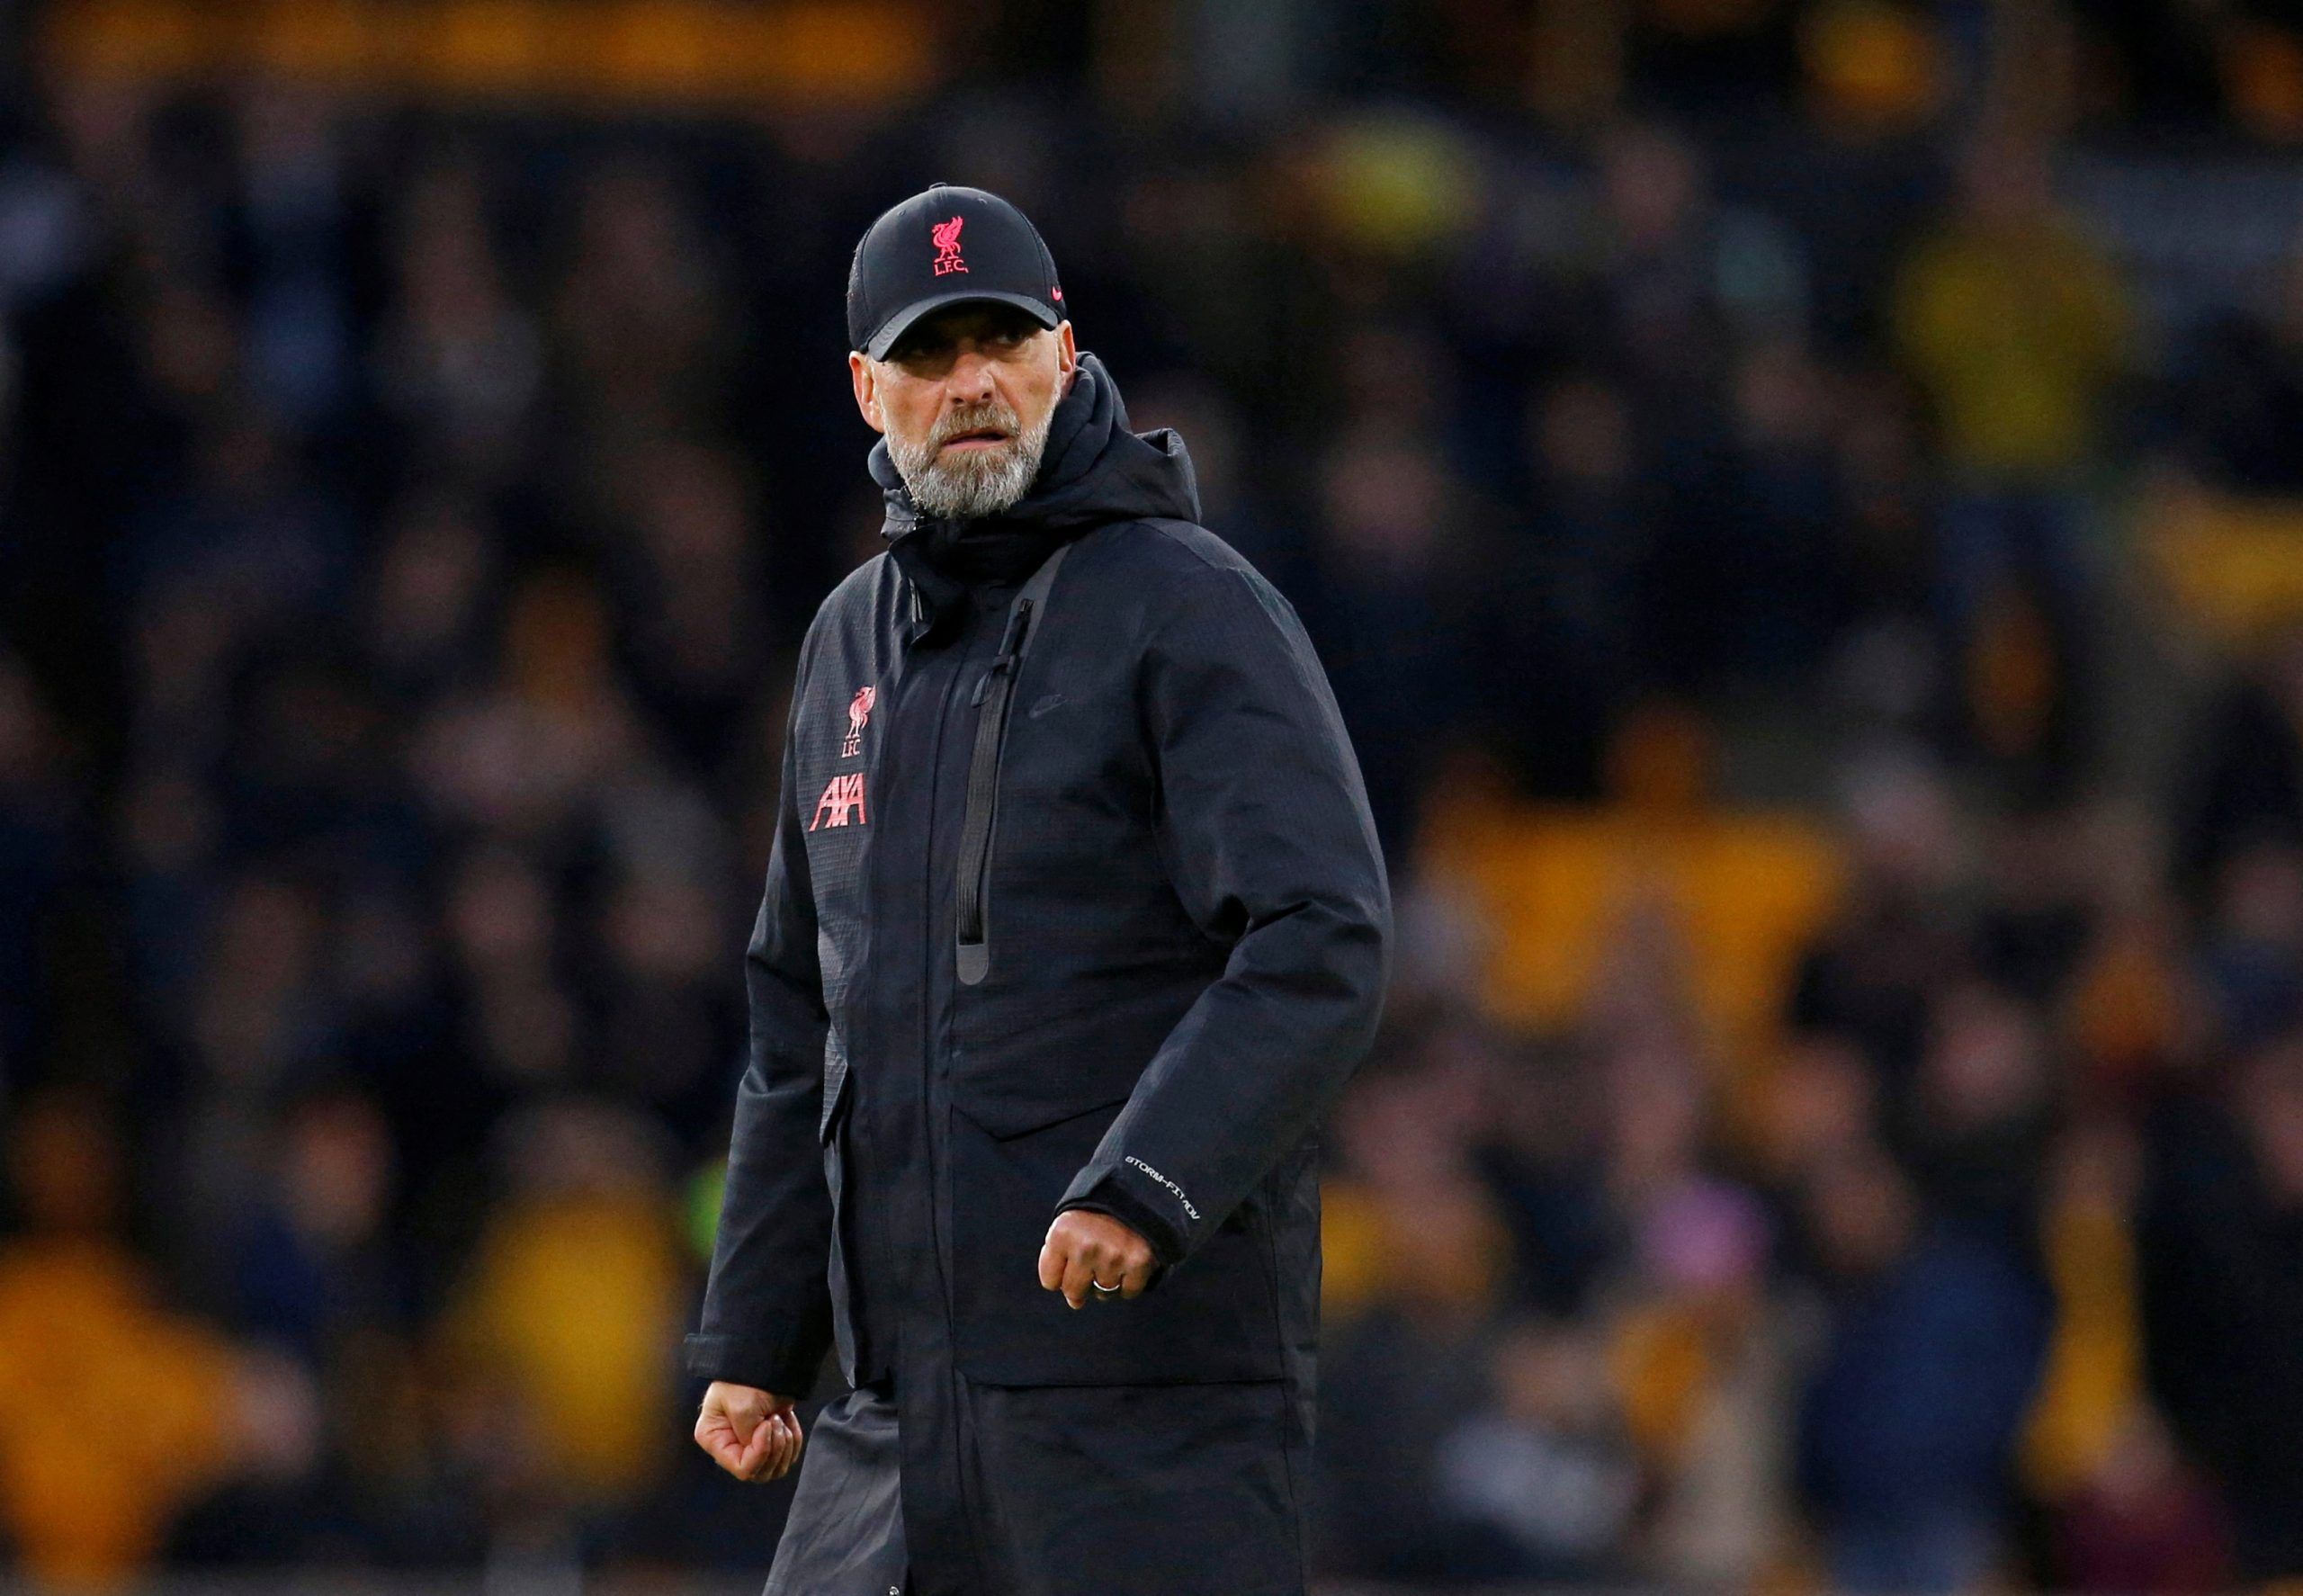 Soccer Football - Premier League - Wolverhampton Wanderers v Liverpool - Molineux Stadium, Wolverhampton, Britain - February 4, 2023 Liverpool manager Juergen Klopp looks dejected after the match Action Images via Reuters/Ed Sykes EDITORIAL USE ONLY. No use with unauthorized audio, video, data, fixture lists, club/league logos or 'live' services. Online in-match use limited to 75 images, no video emulation. No use in betting, games or single club /league/player publications.  Please contact your